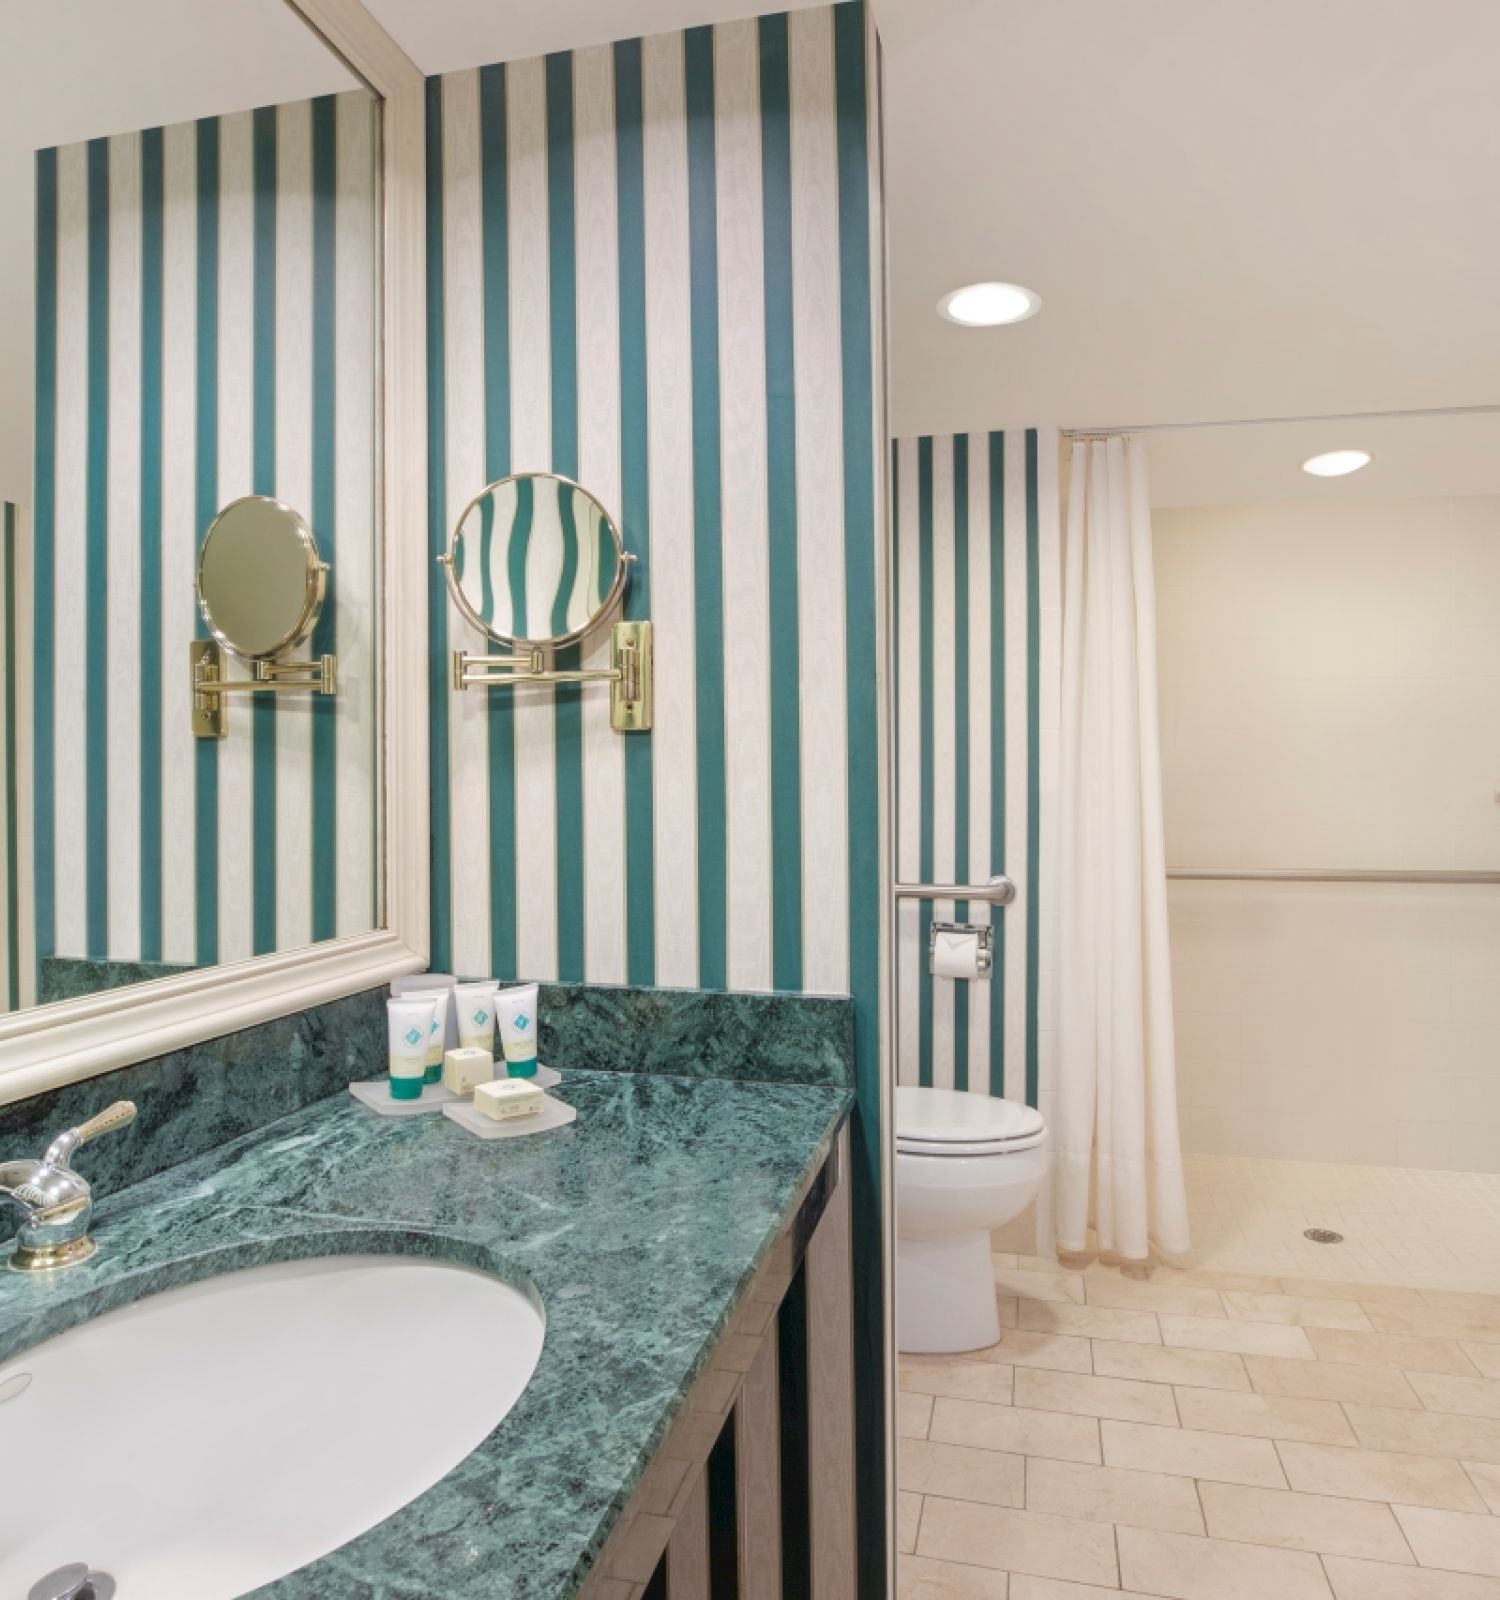 A bathroom with striped wallpaper, mirror, sink, and a visible shower area.